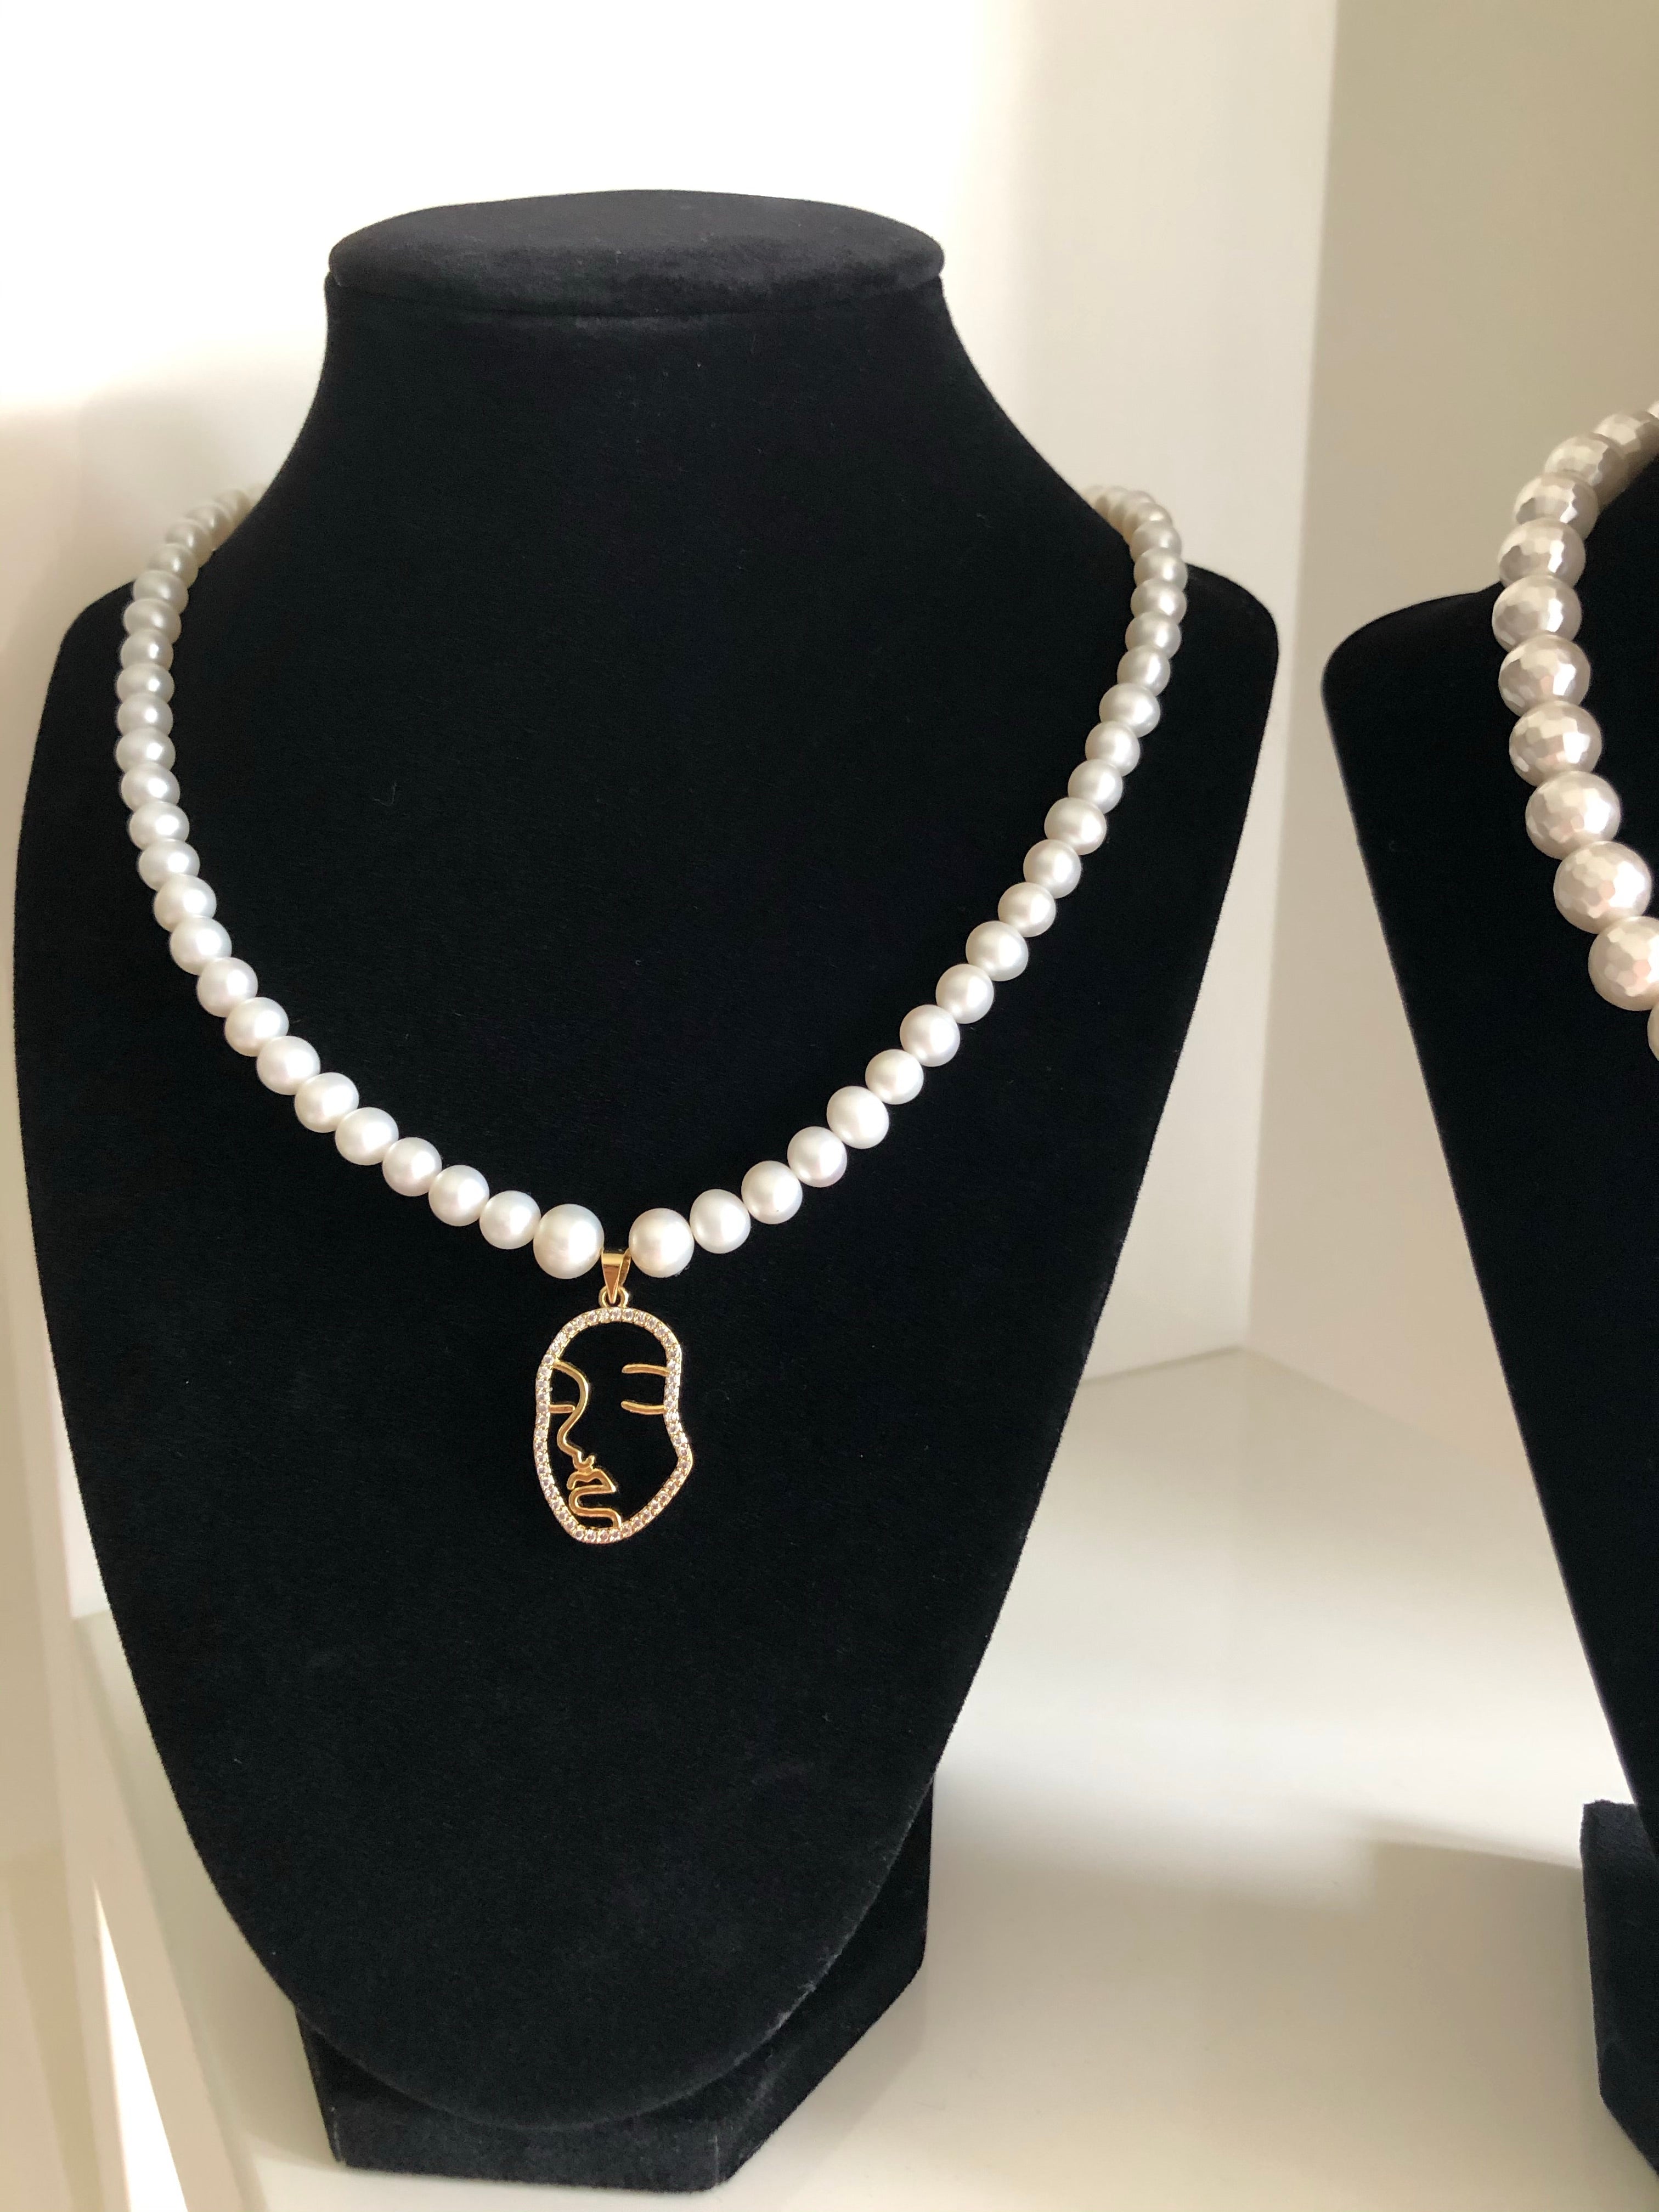 Handmade Pearl Necklace with Face Pendant